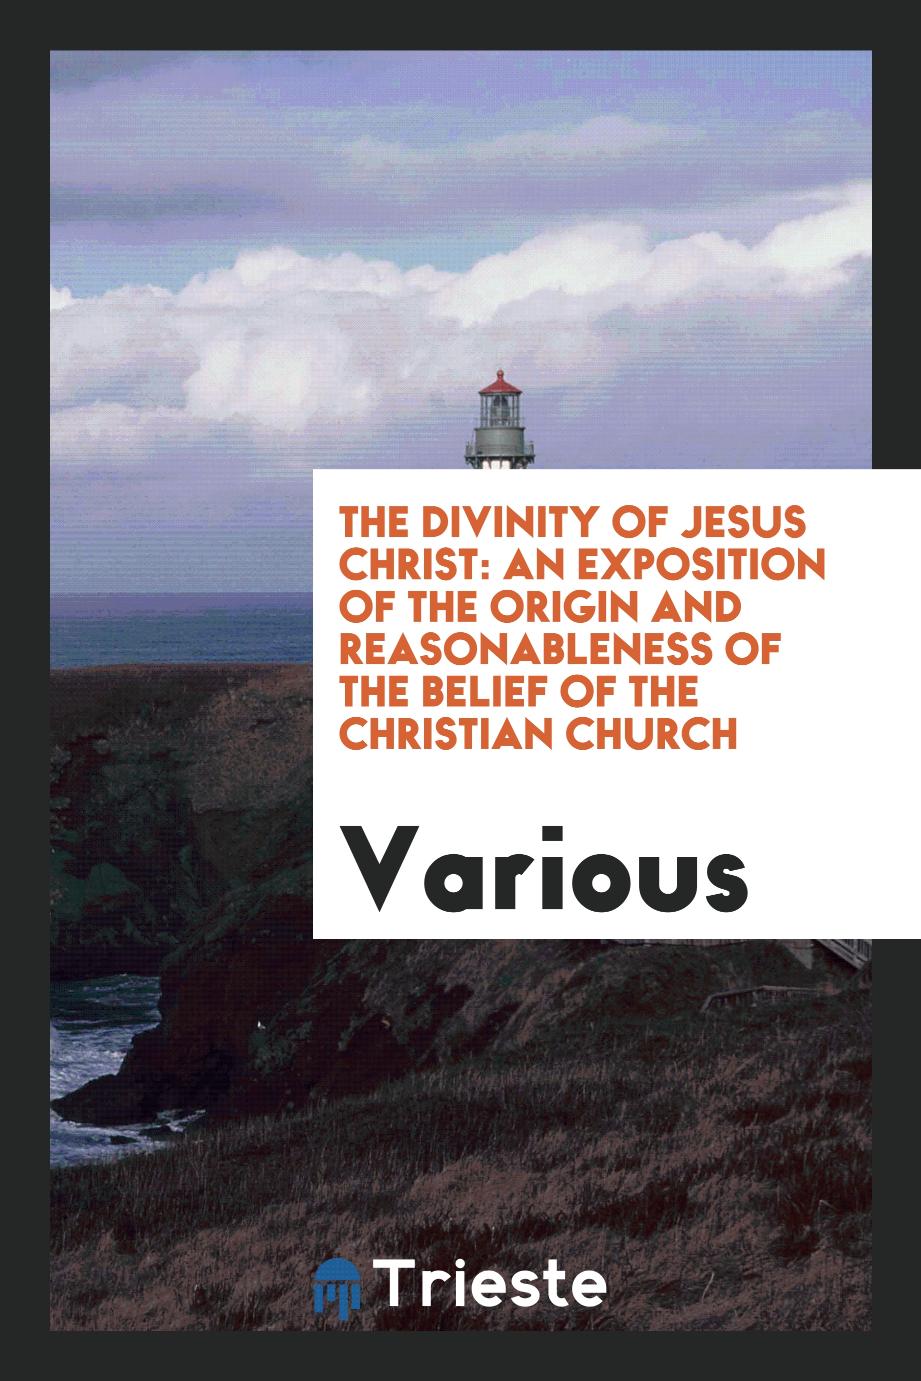 The Divinity of Jesus Christ: An Exposition of the Origin and Reasonableness of the Belief of the Christian Church